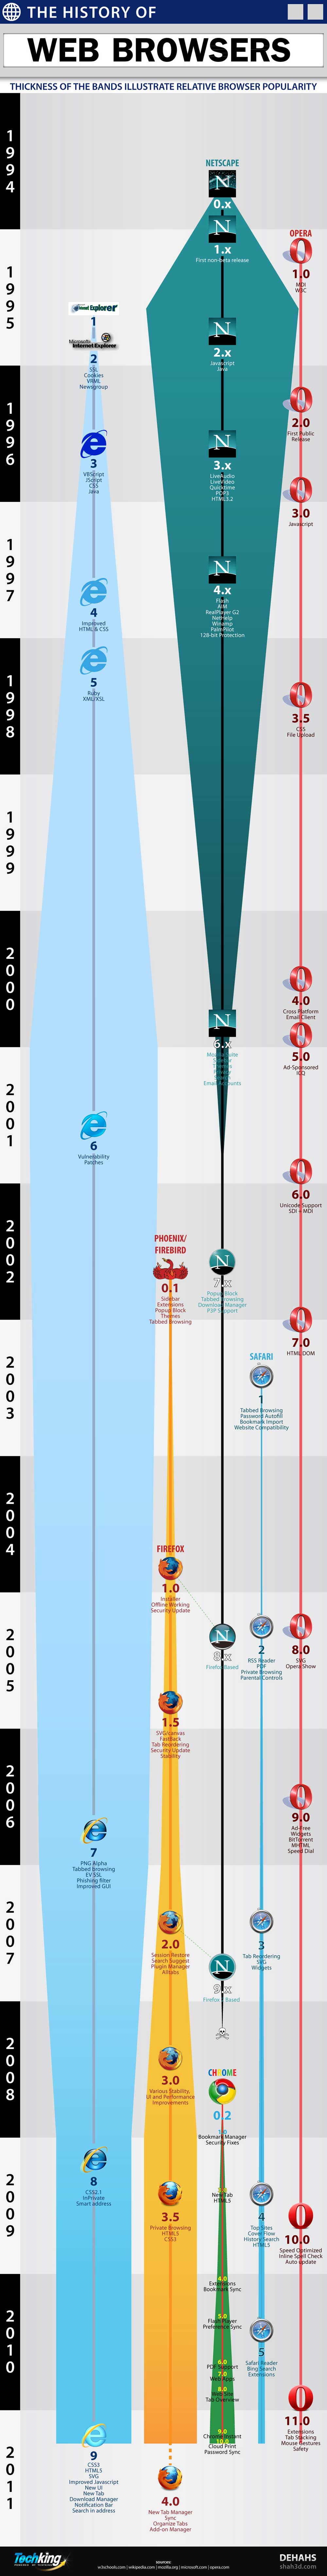 History of the Web Browser